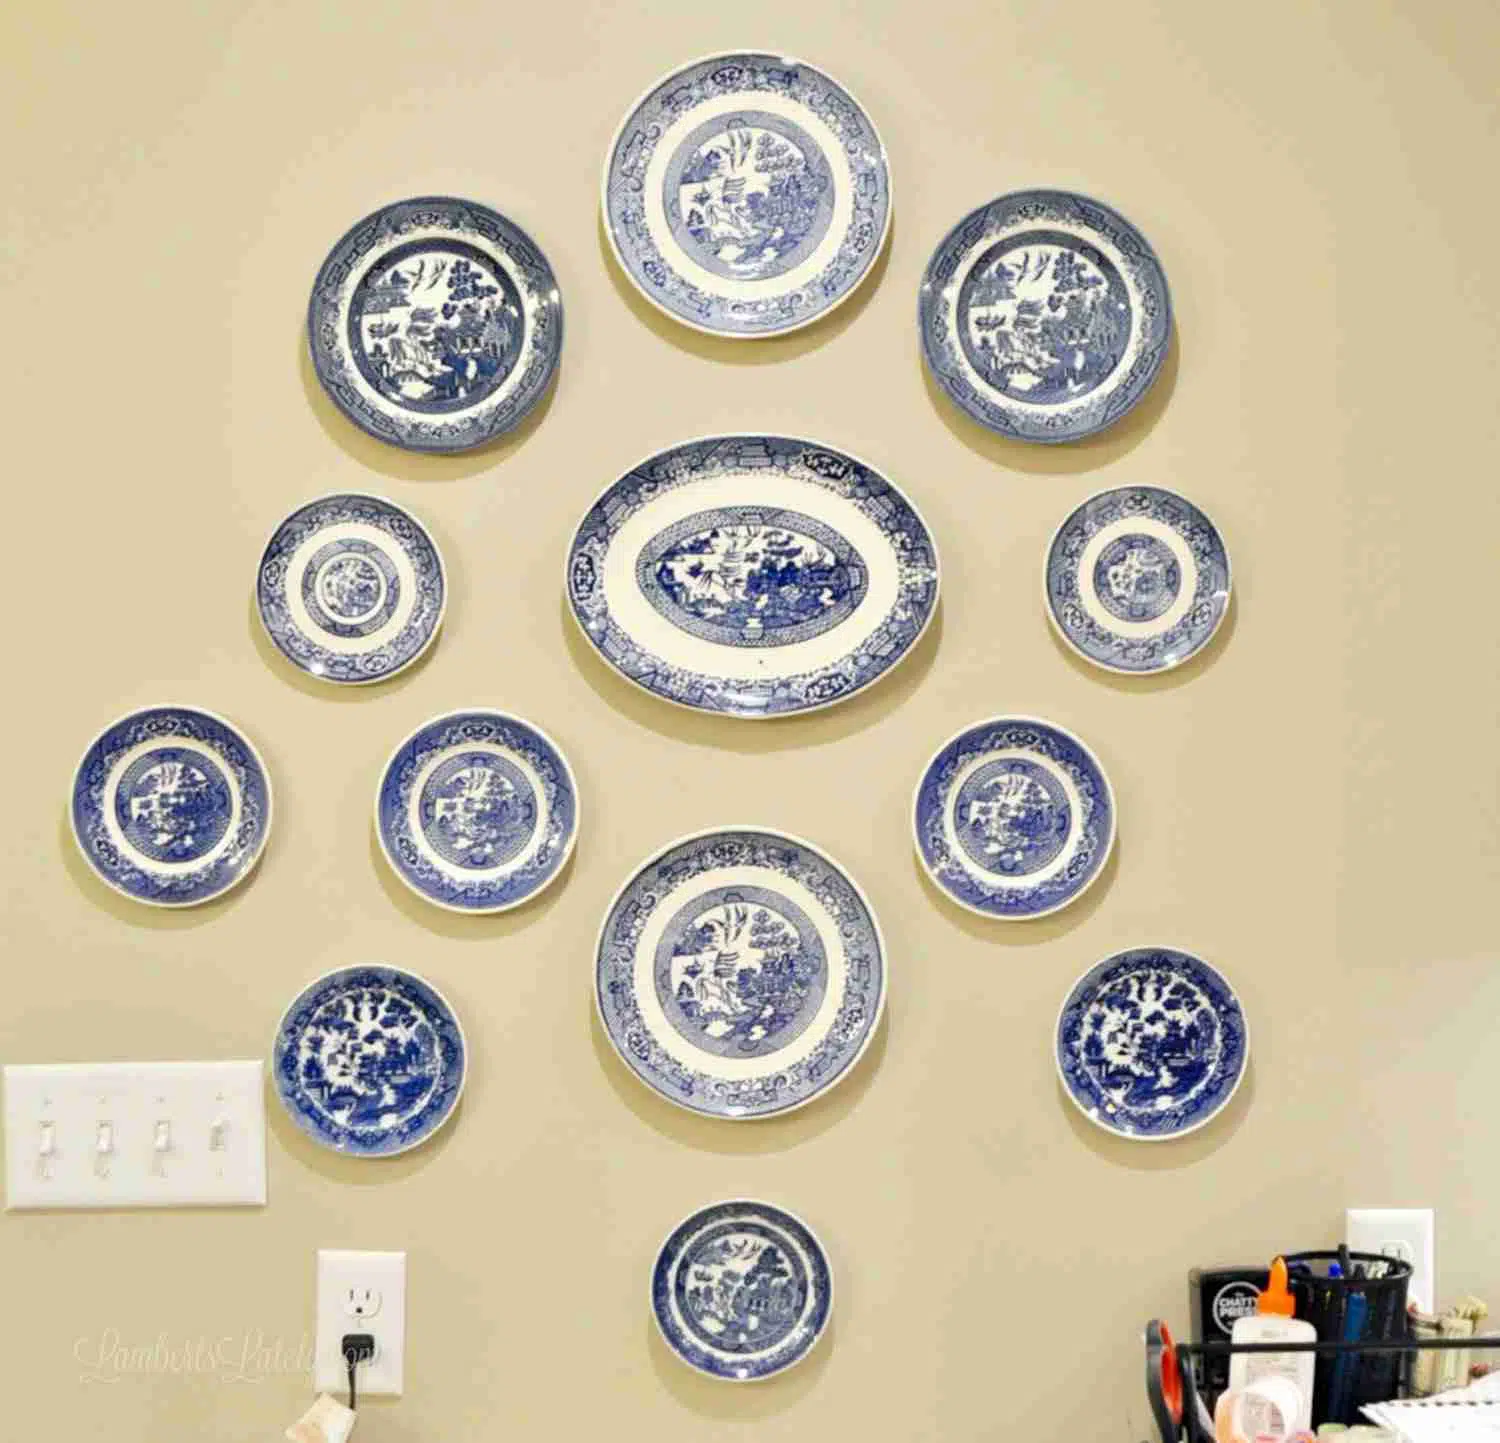 blue willow plates hanging above a desk.